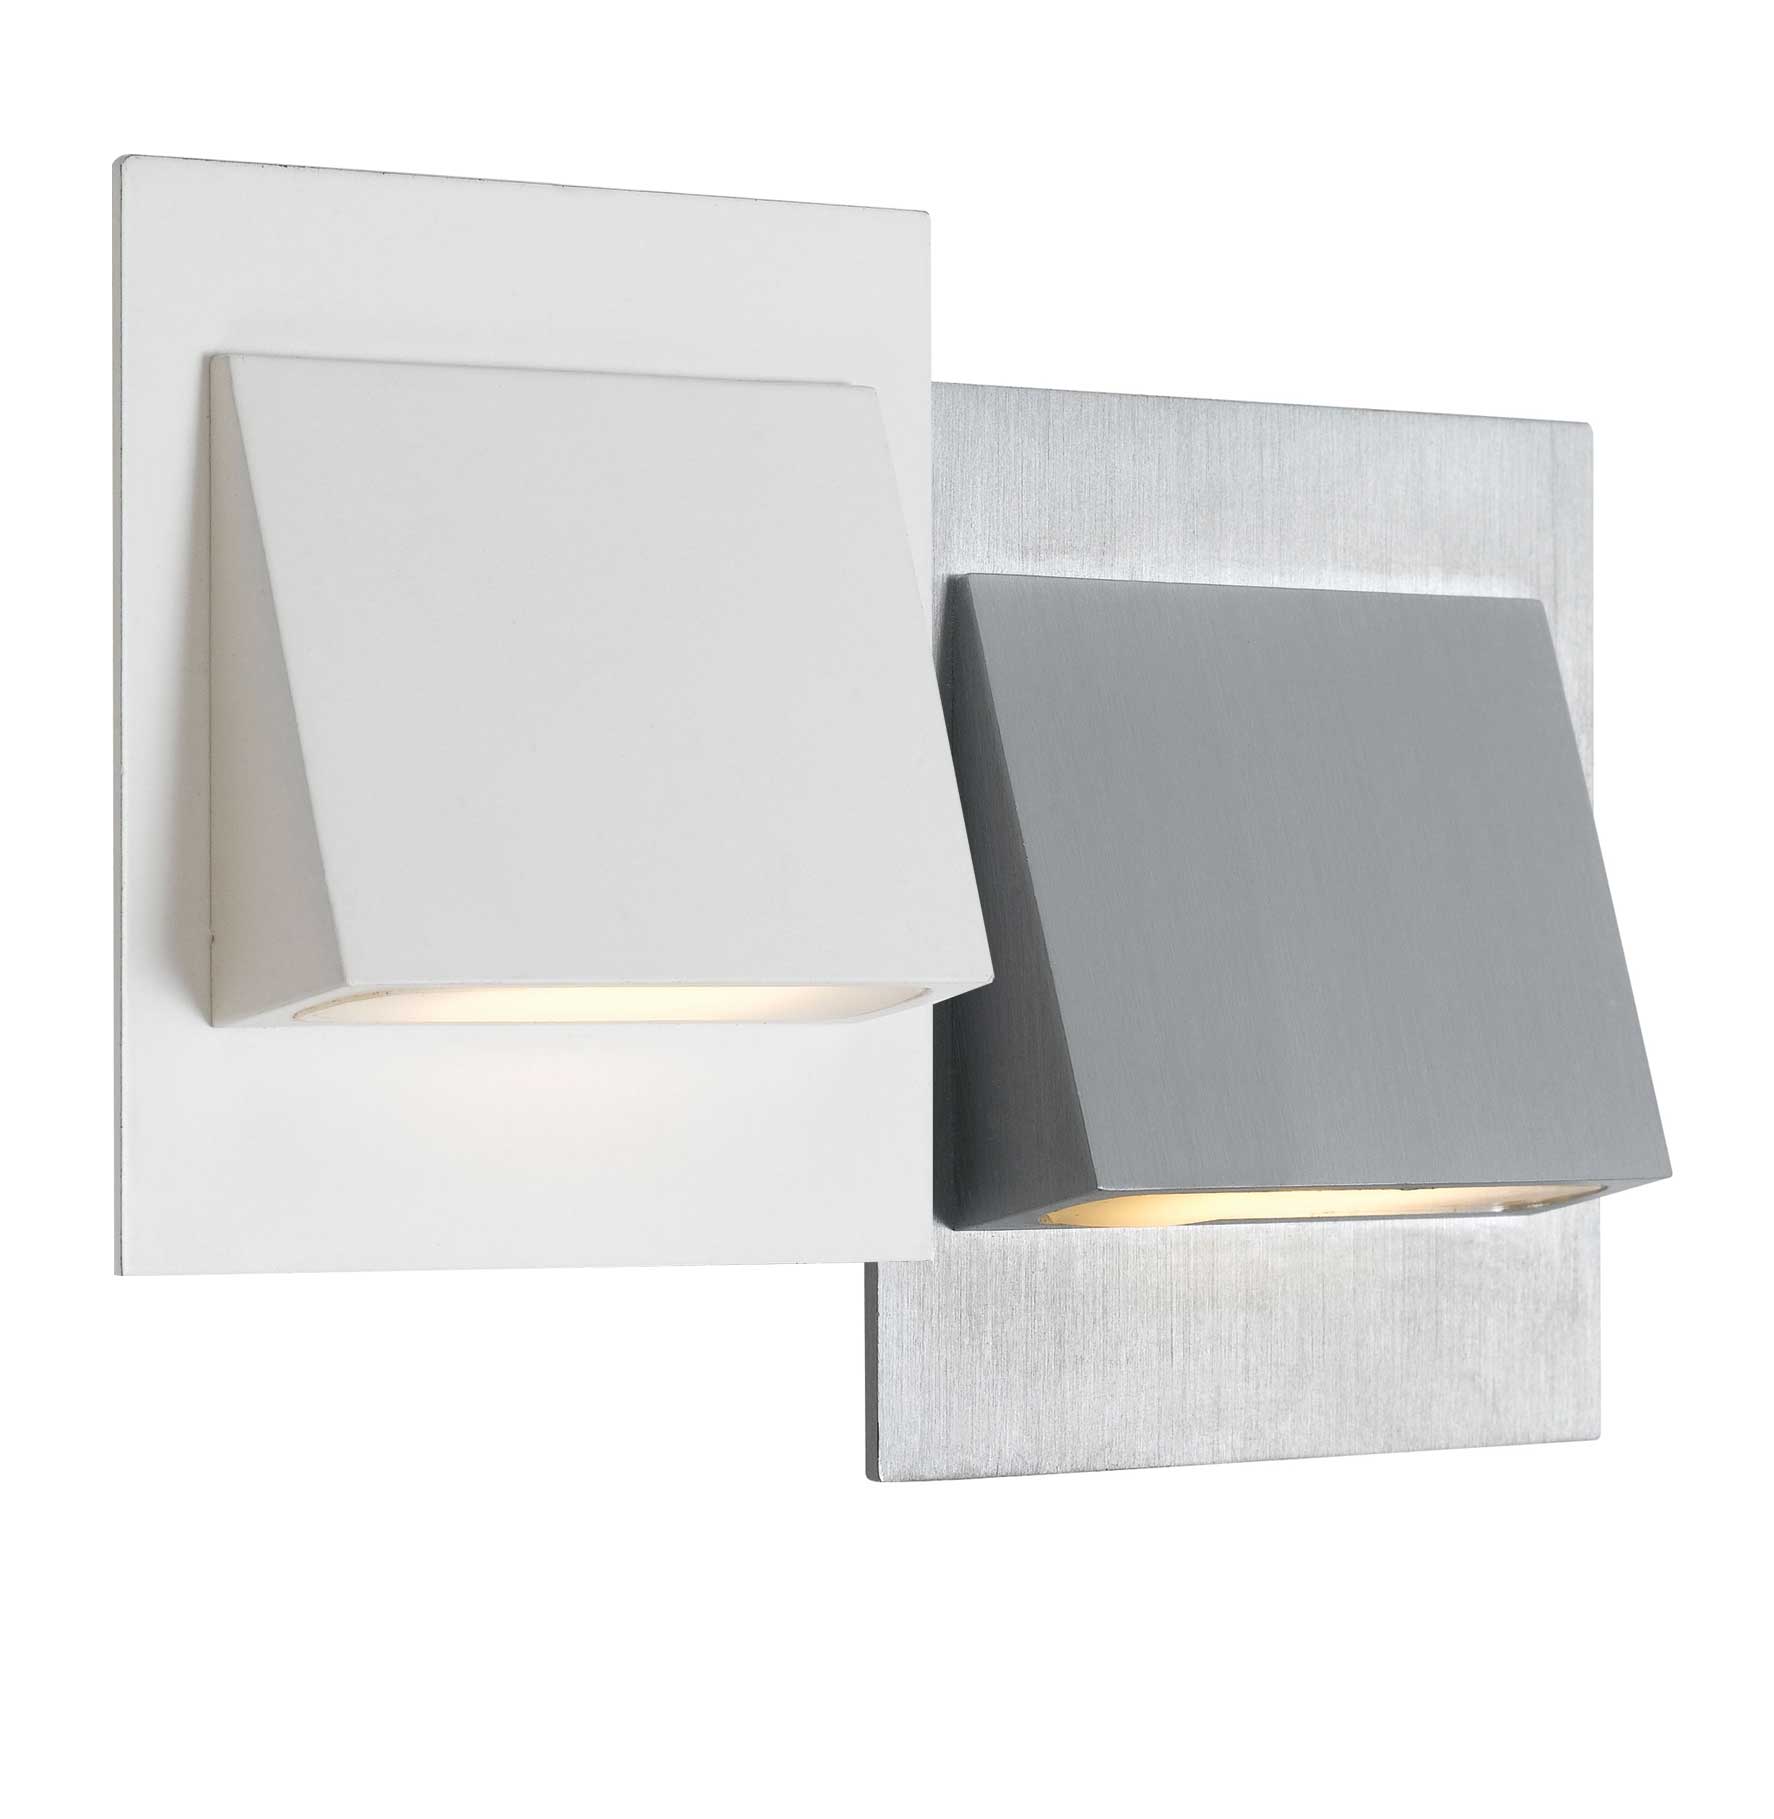 Brea White Cool White LED Wedge Offset Recessed Stair Fixture